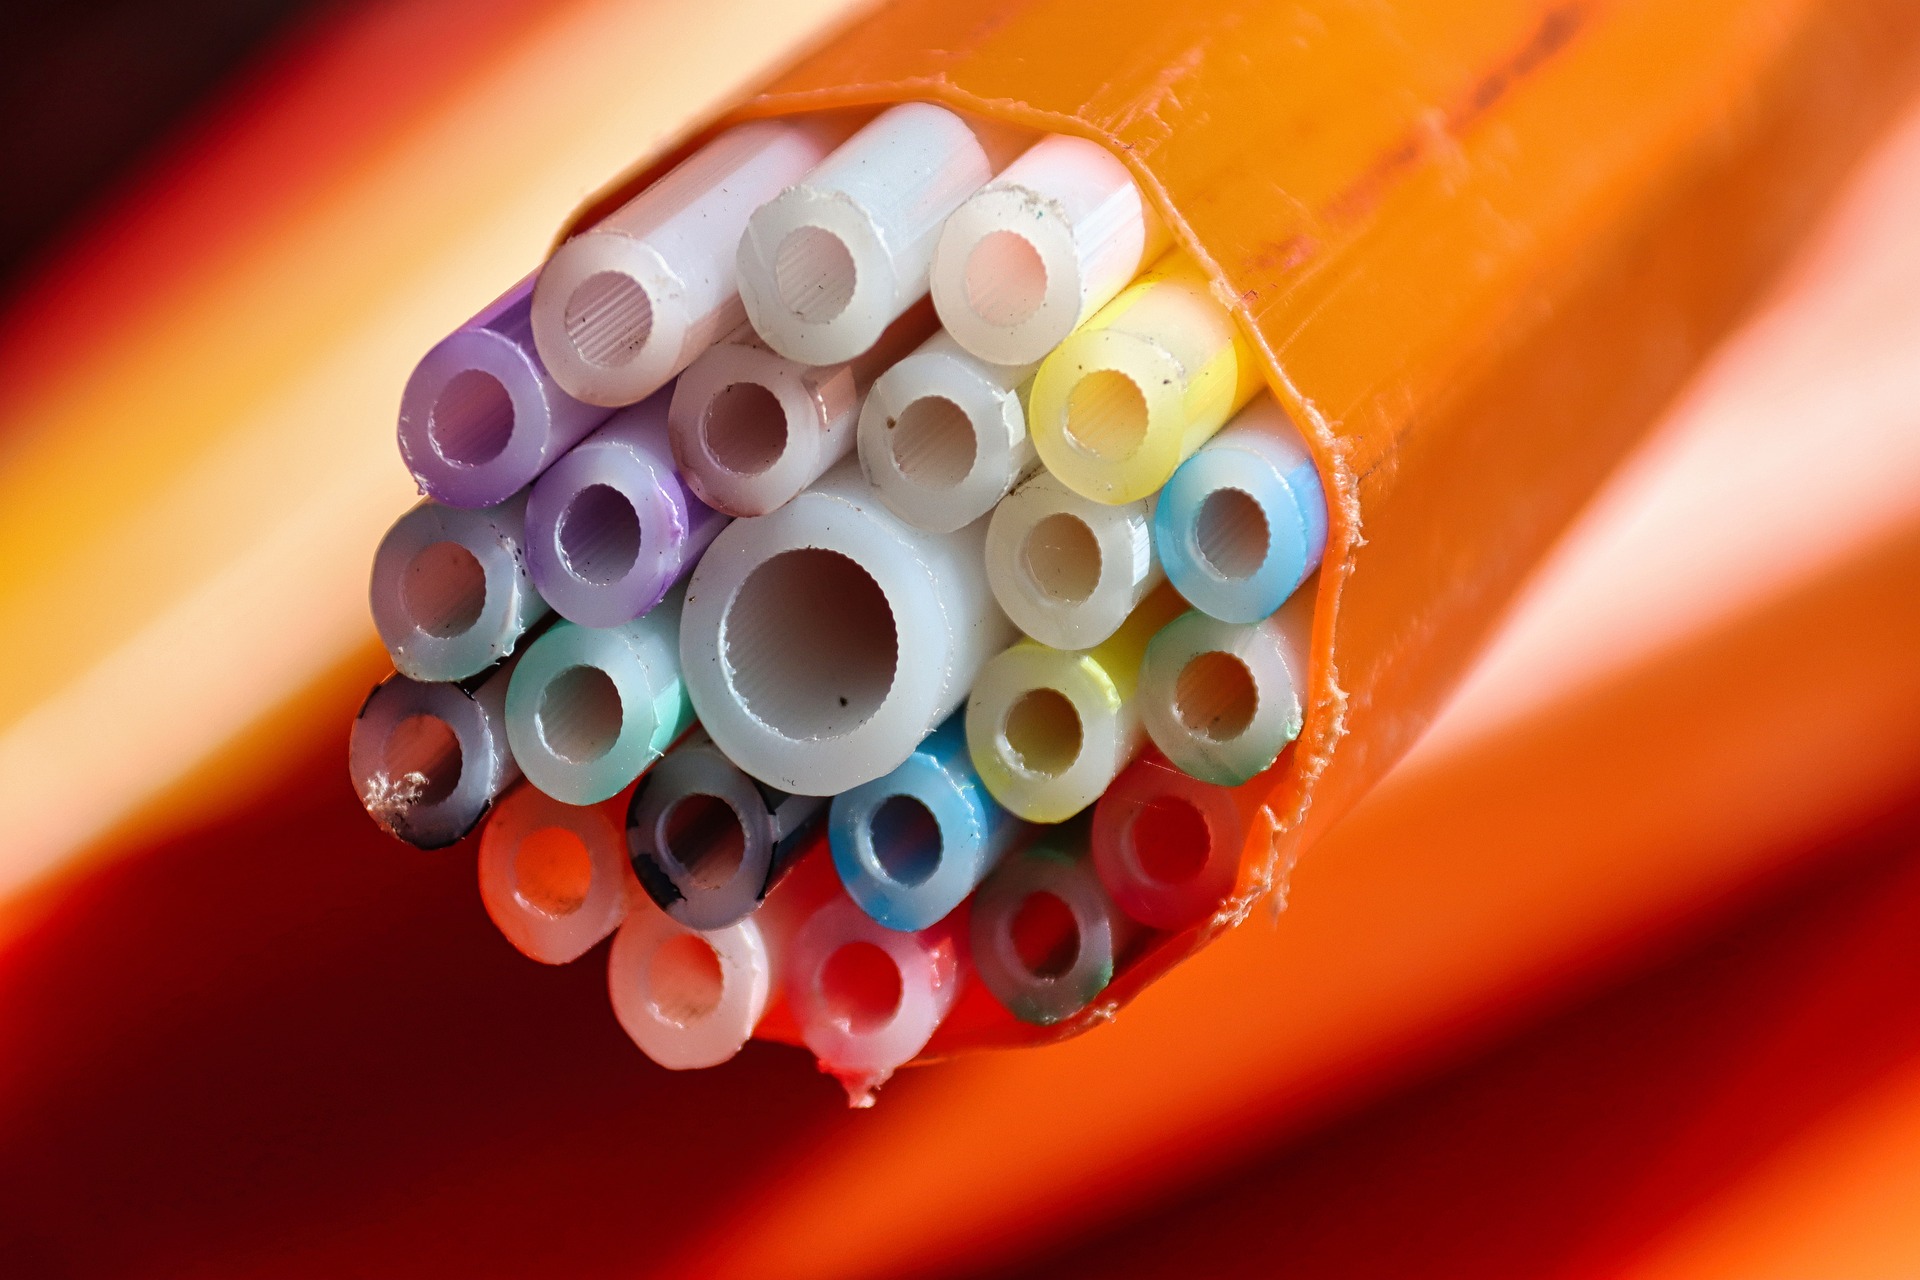 How is a Torn, Underground Fiber Optic Cable Repaired?